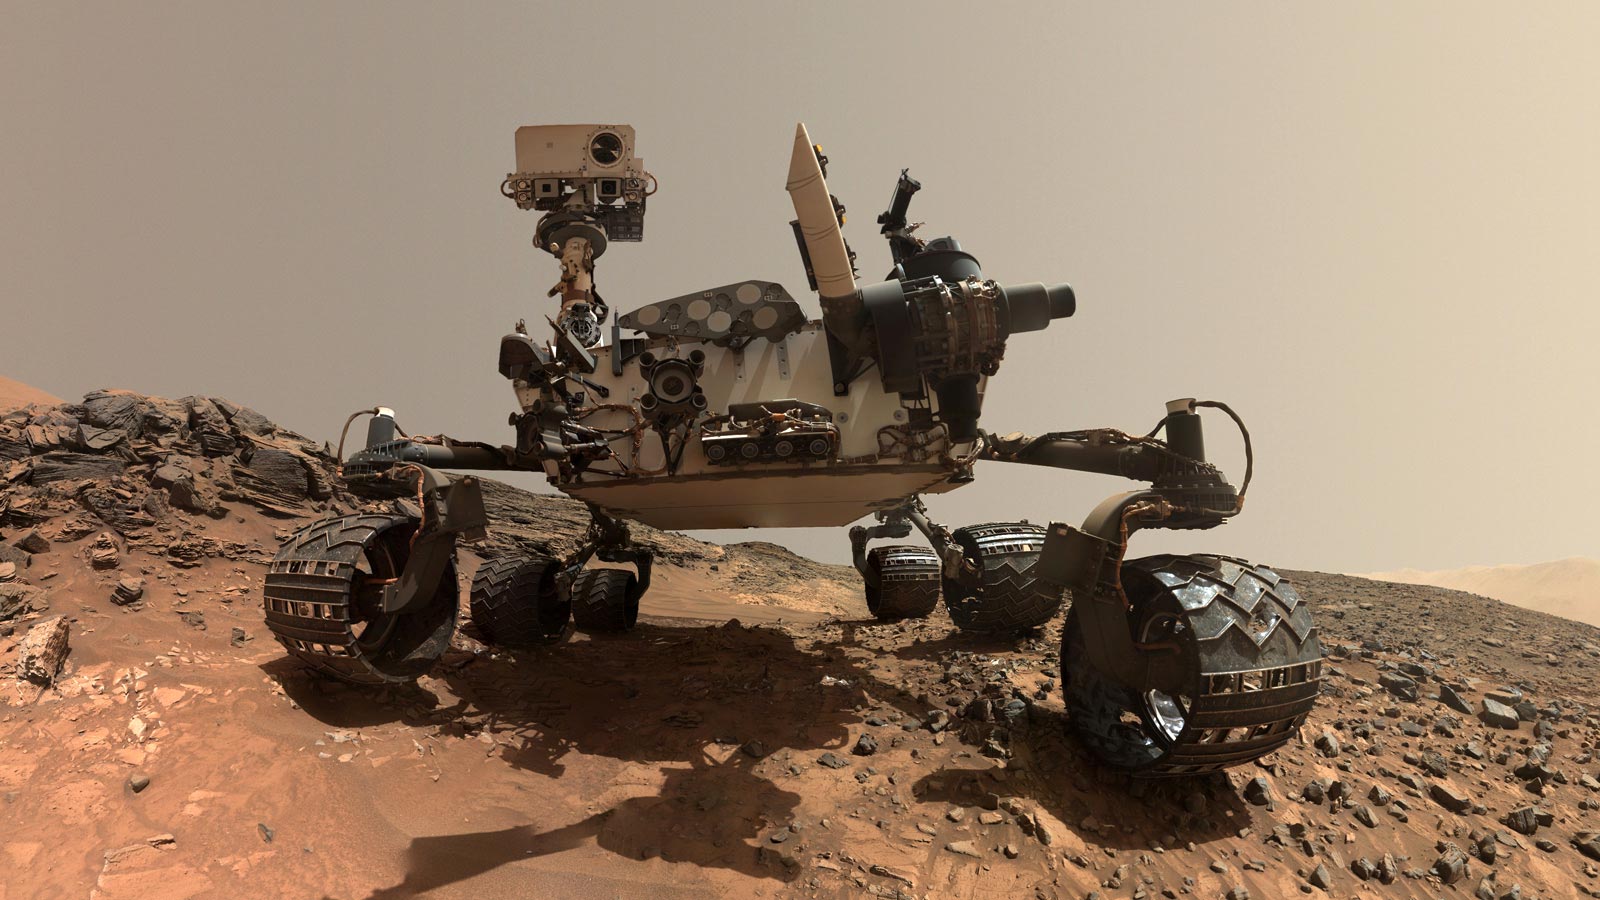 NASA's Curiosity Mars Rover Still Going 10 Years After Landing – What It's Learned - SciTechDaily